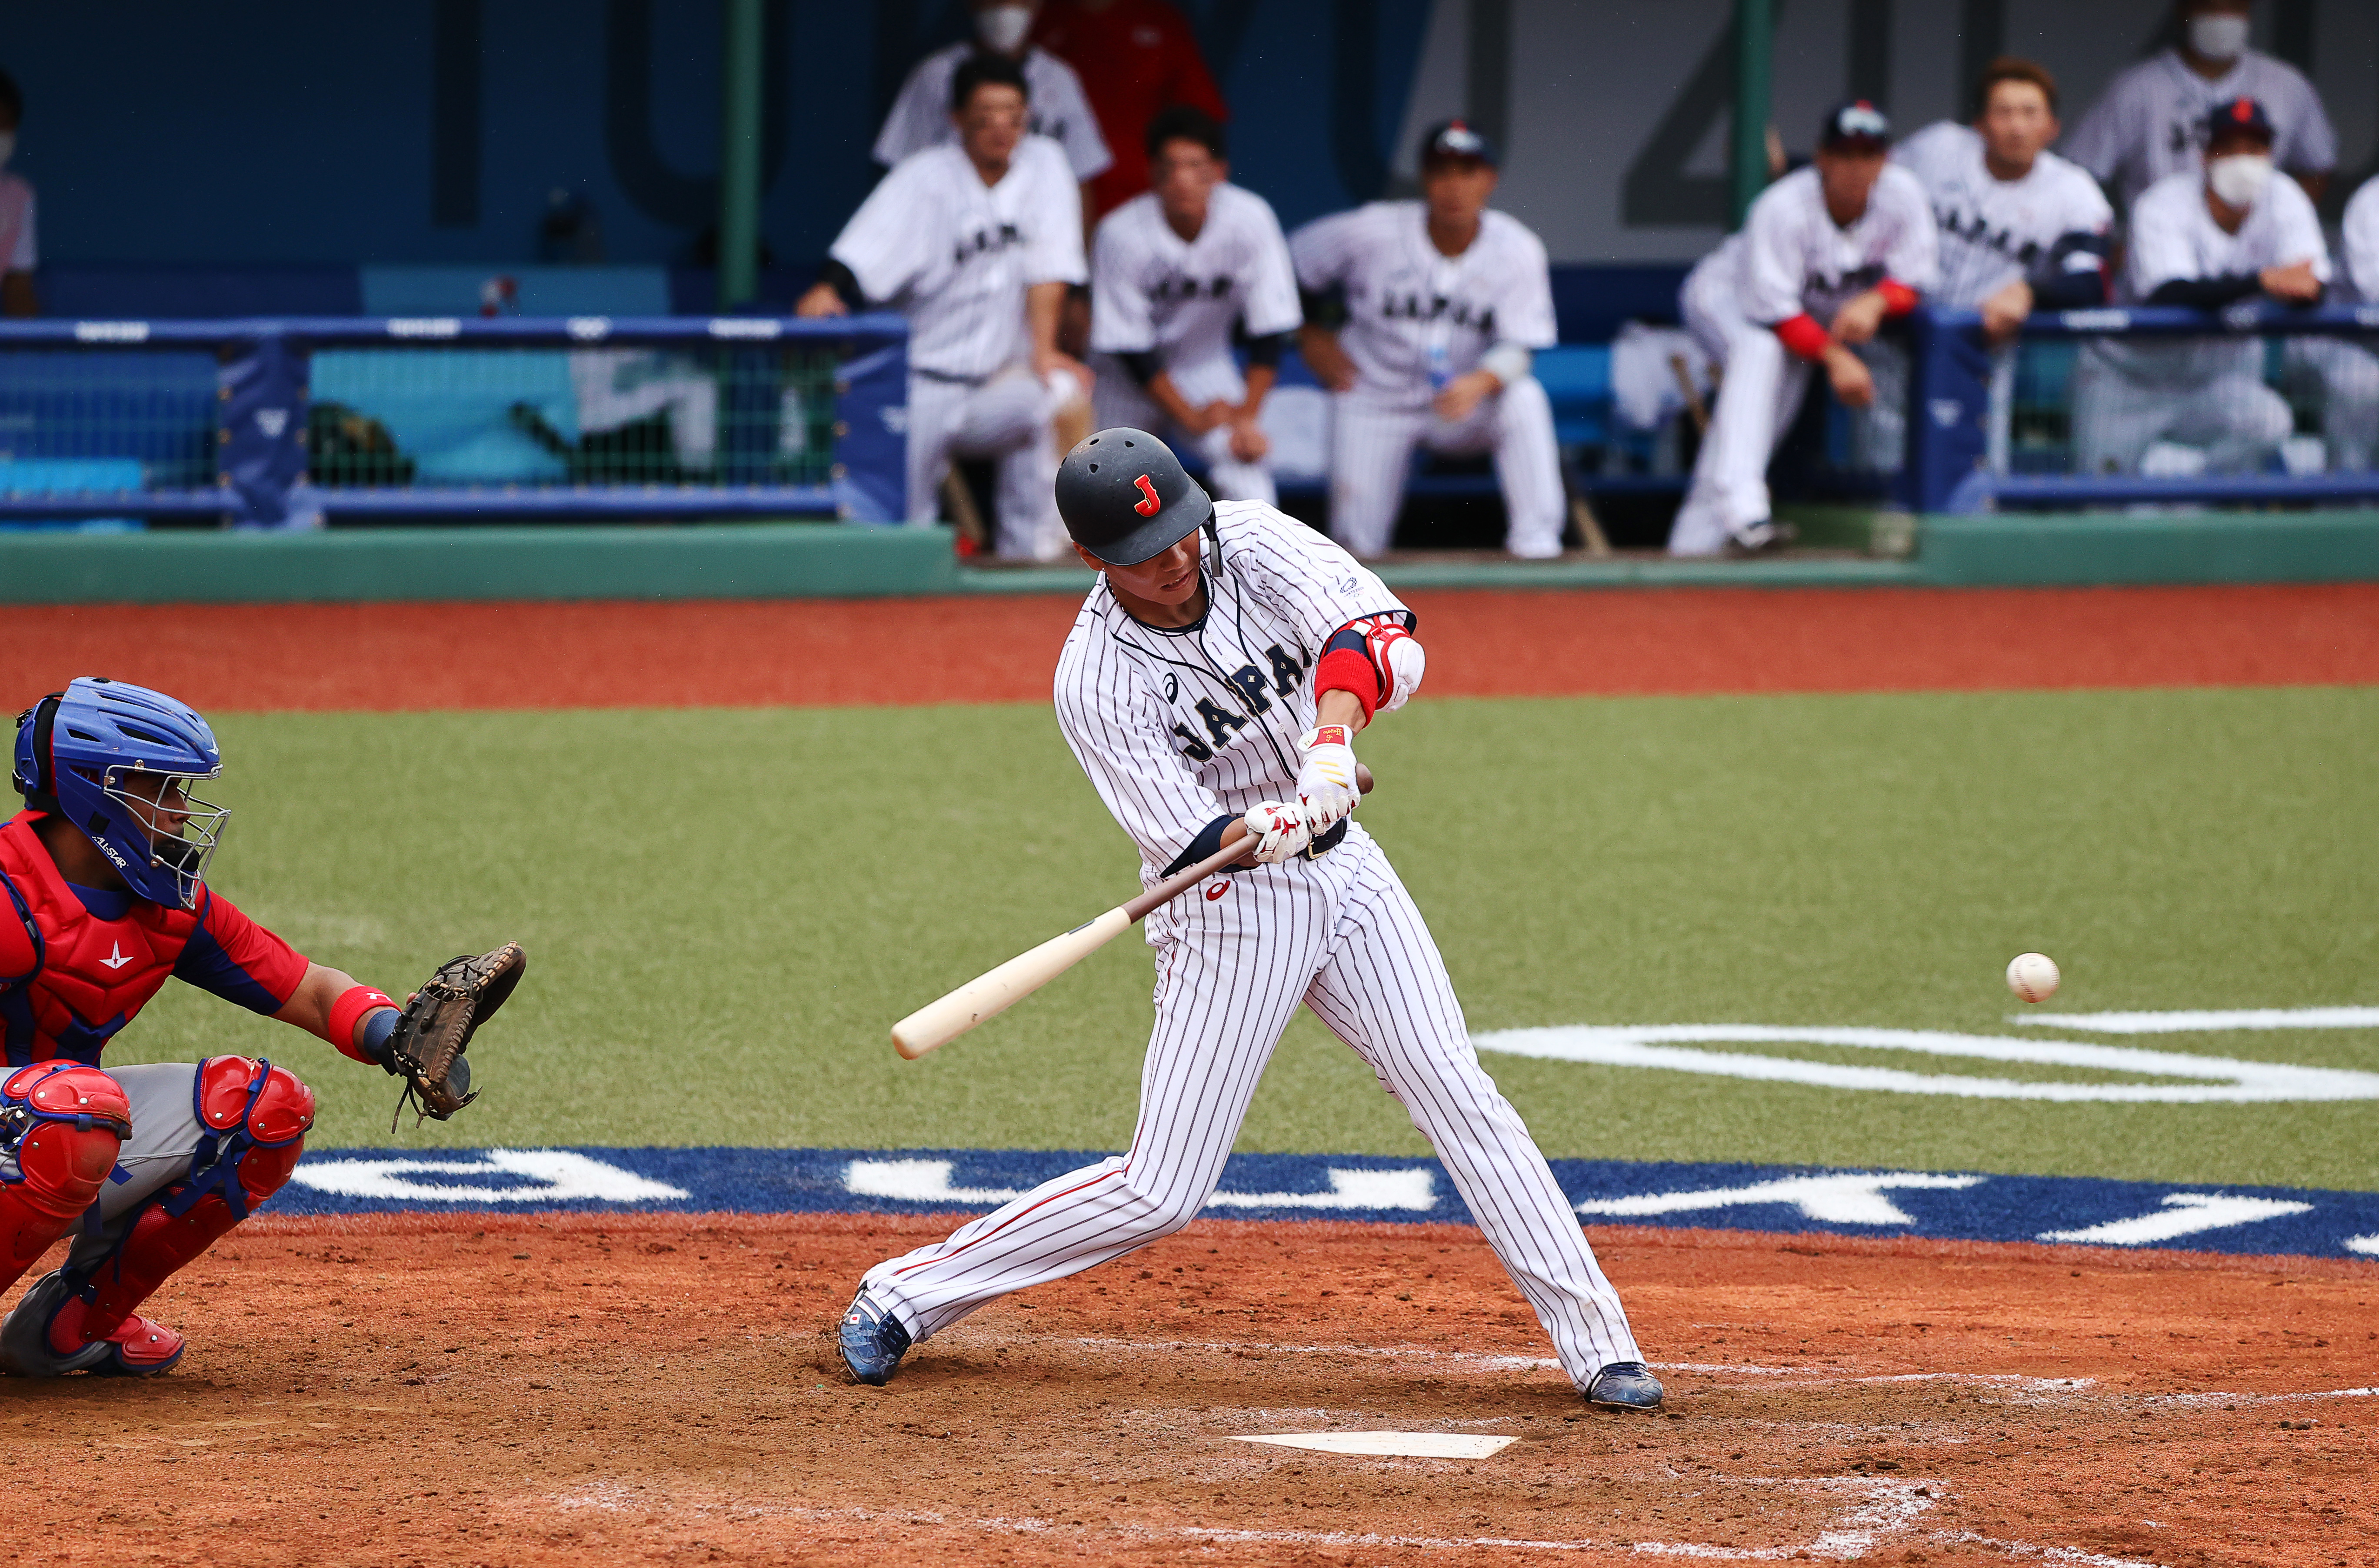 Baseball - Men - Opening Round - Group A - Dominican Republic v Japan